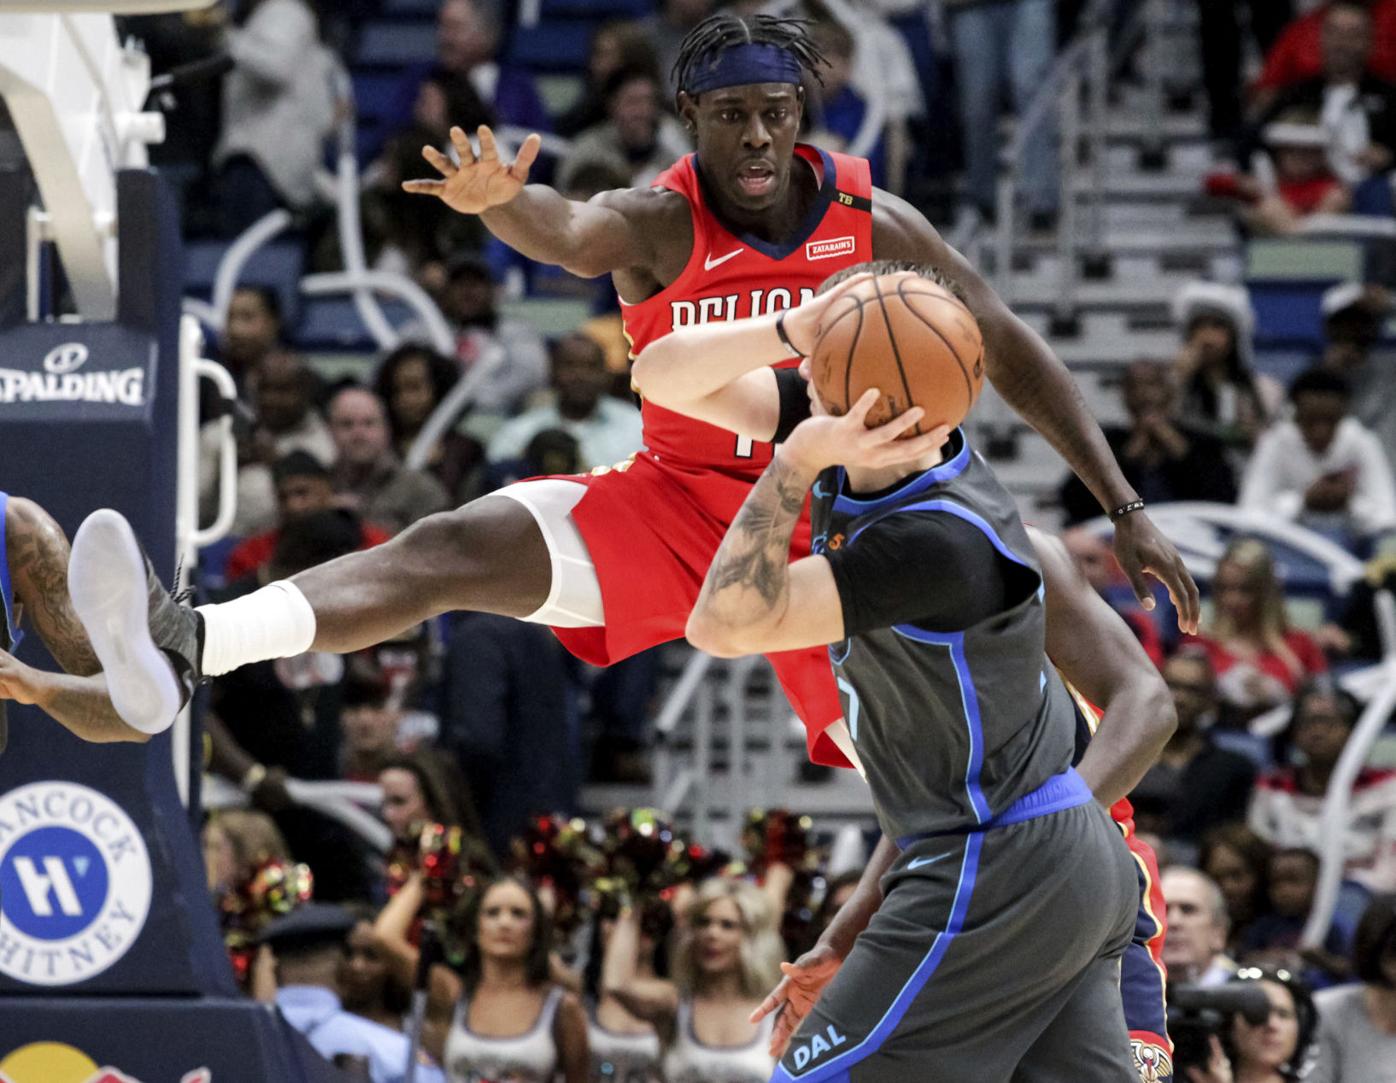 Report: USA Basketball “aggressively pursuing” Jrue Holiday for